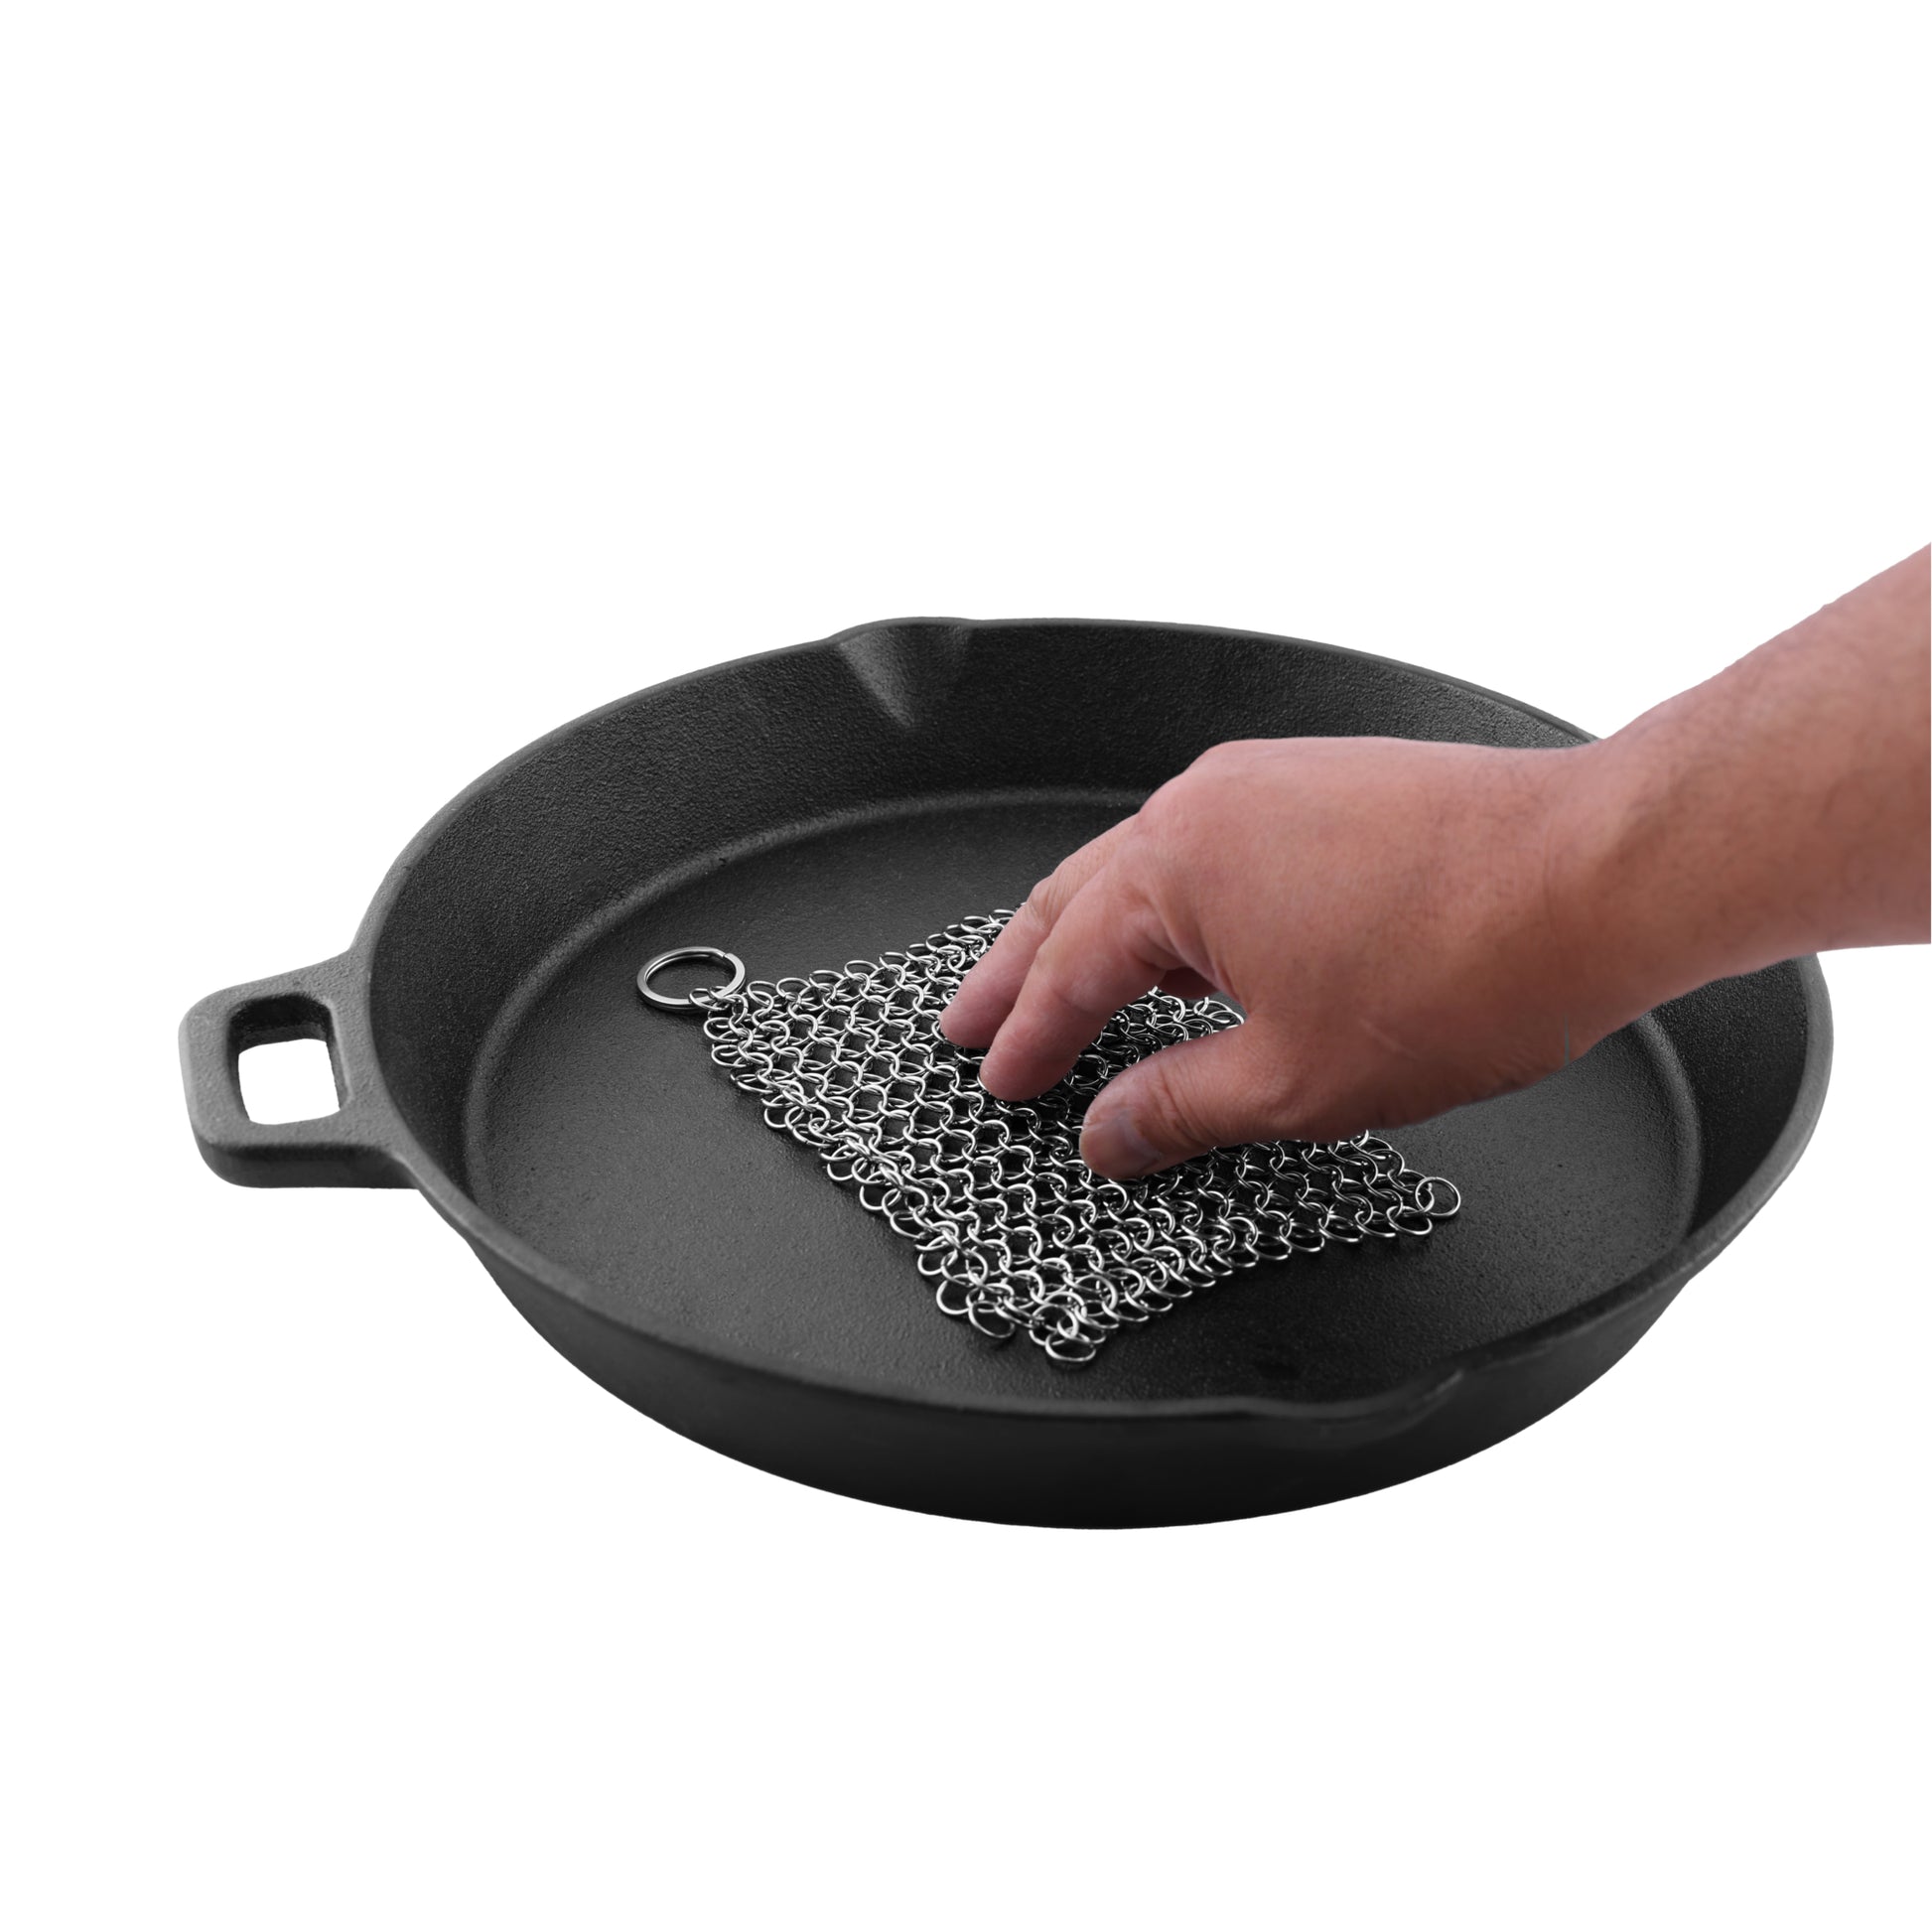 Mythrojan Stainless Steel Scrubber - Ideal for Cast Iron Skillet